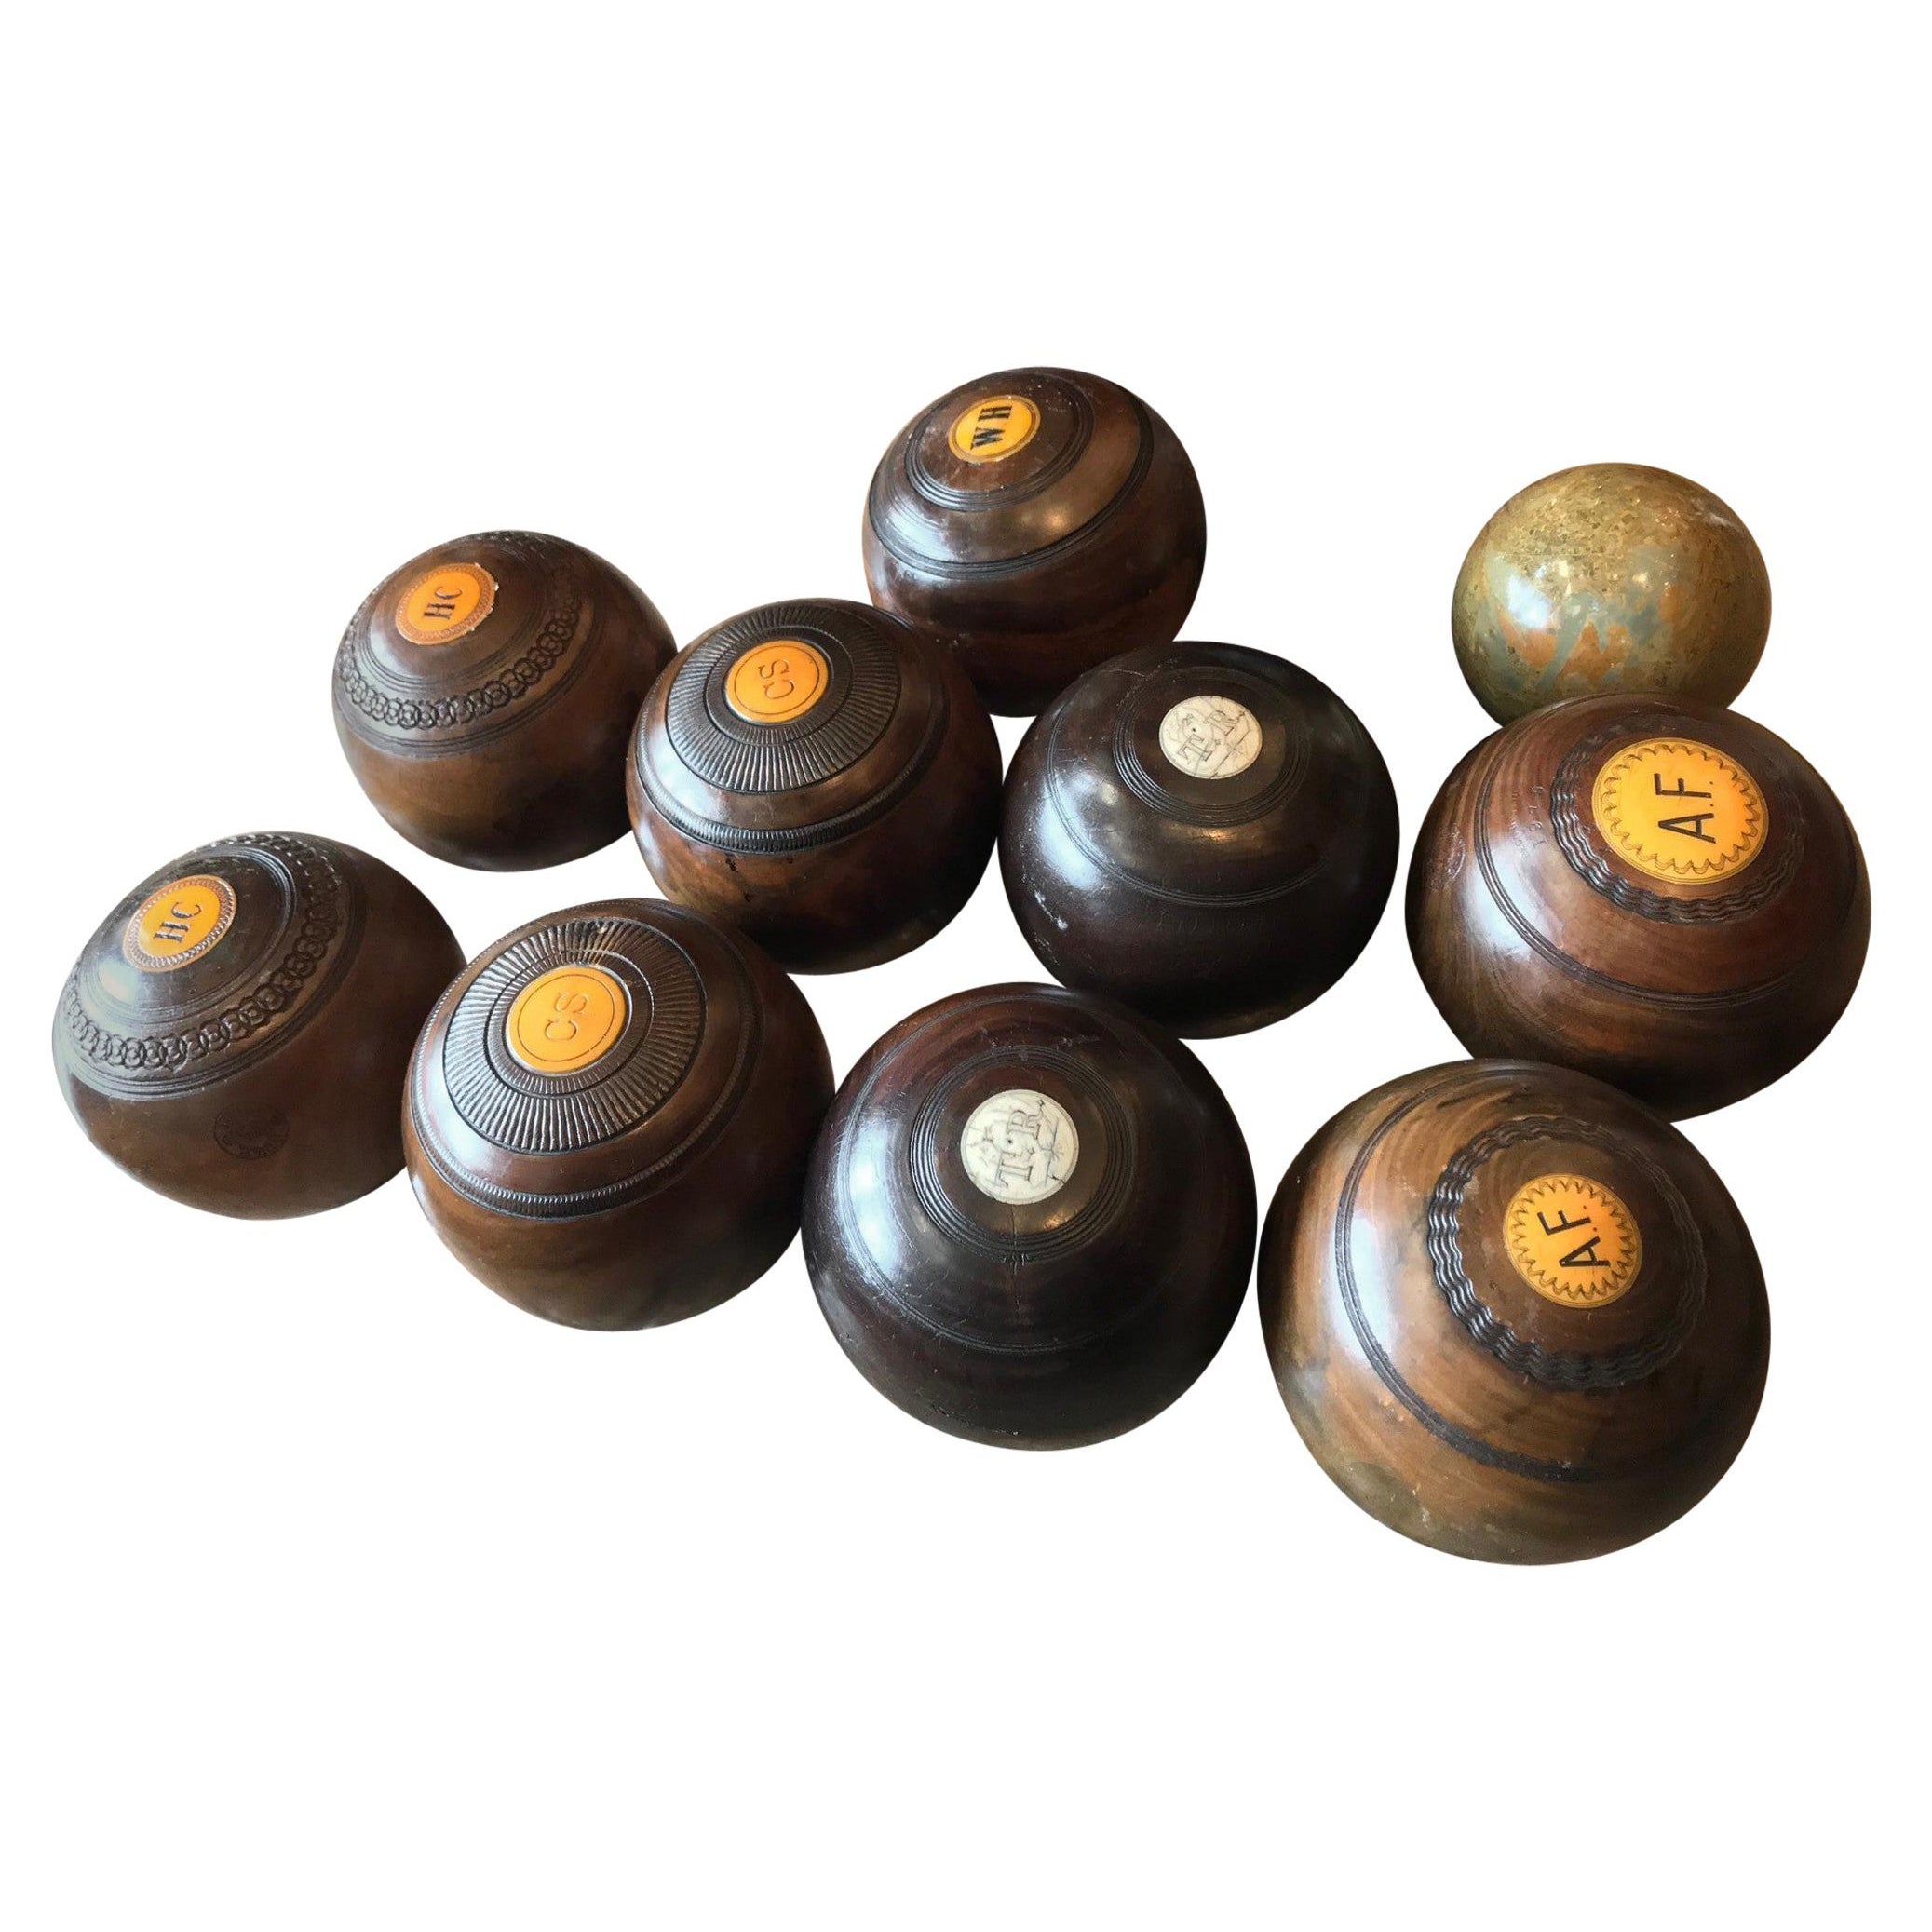 10 Carpet Lawn Bowling Hand Carved Wood & Stone Balls Antique Office Gift Idea For Sale